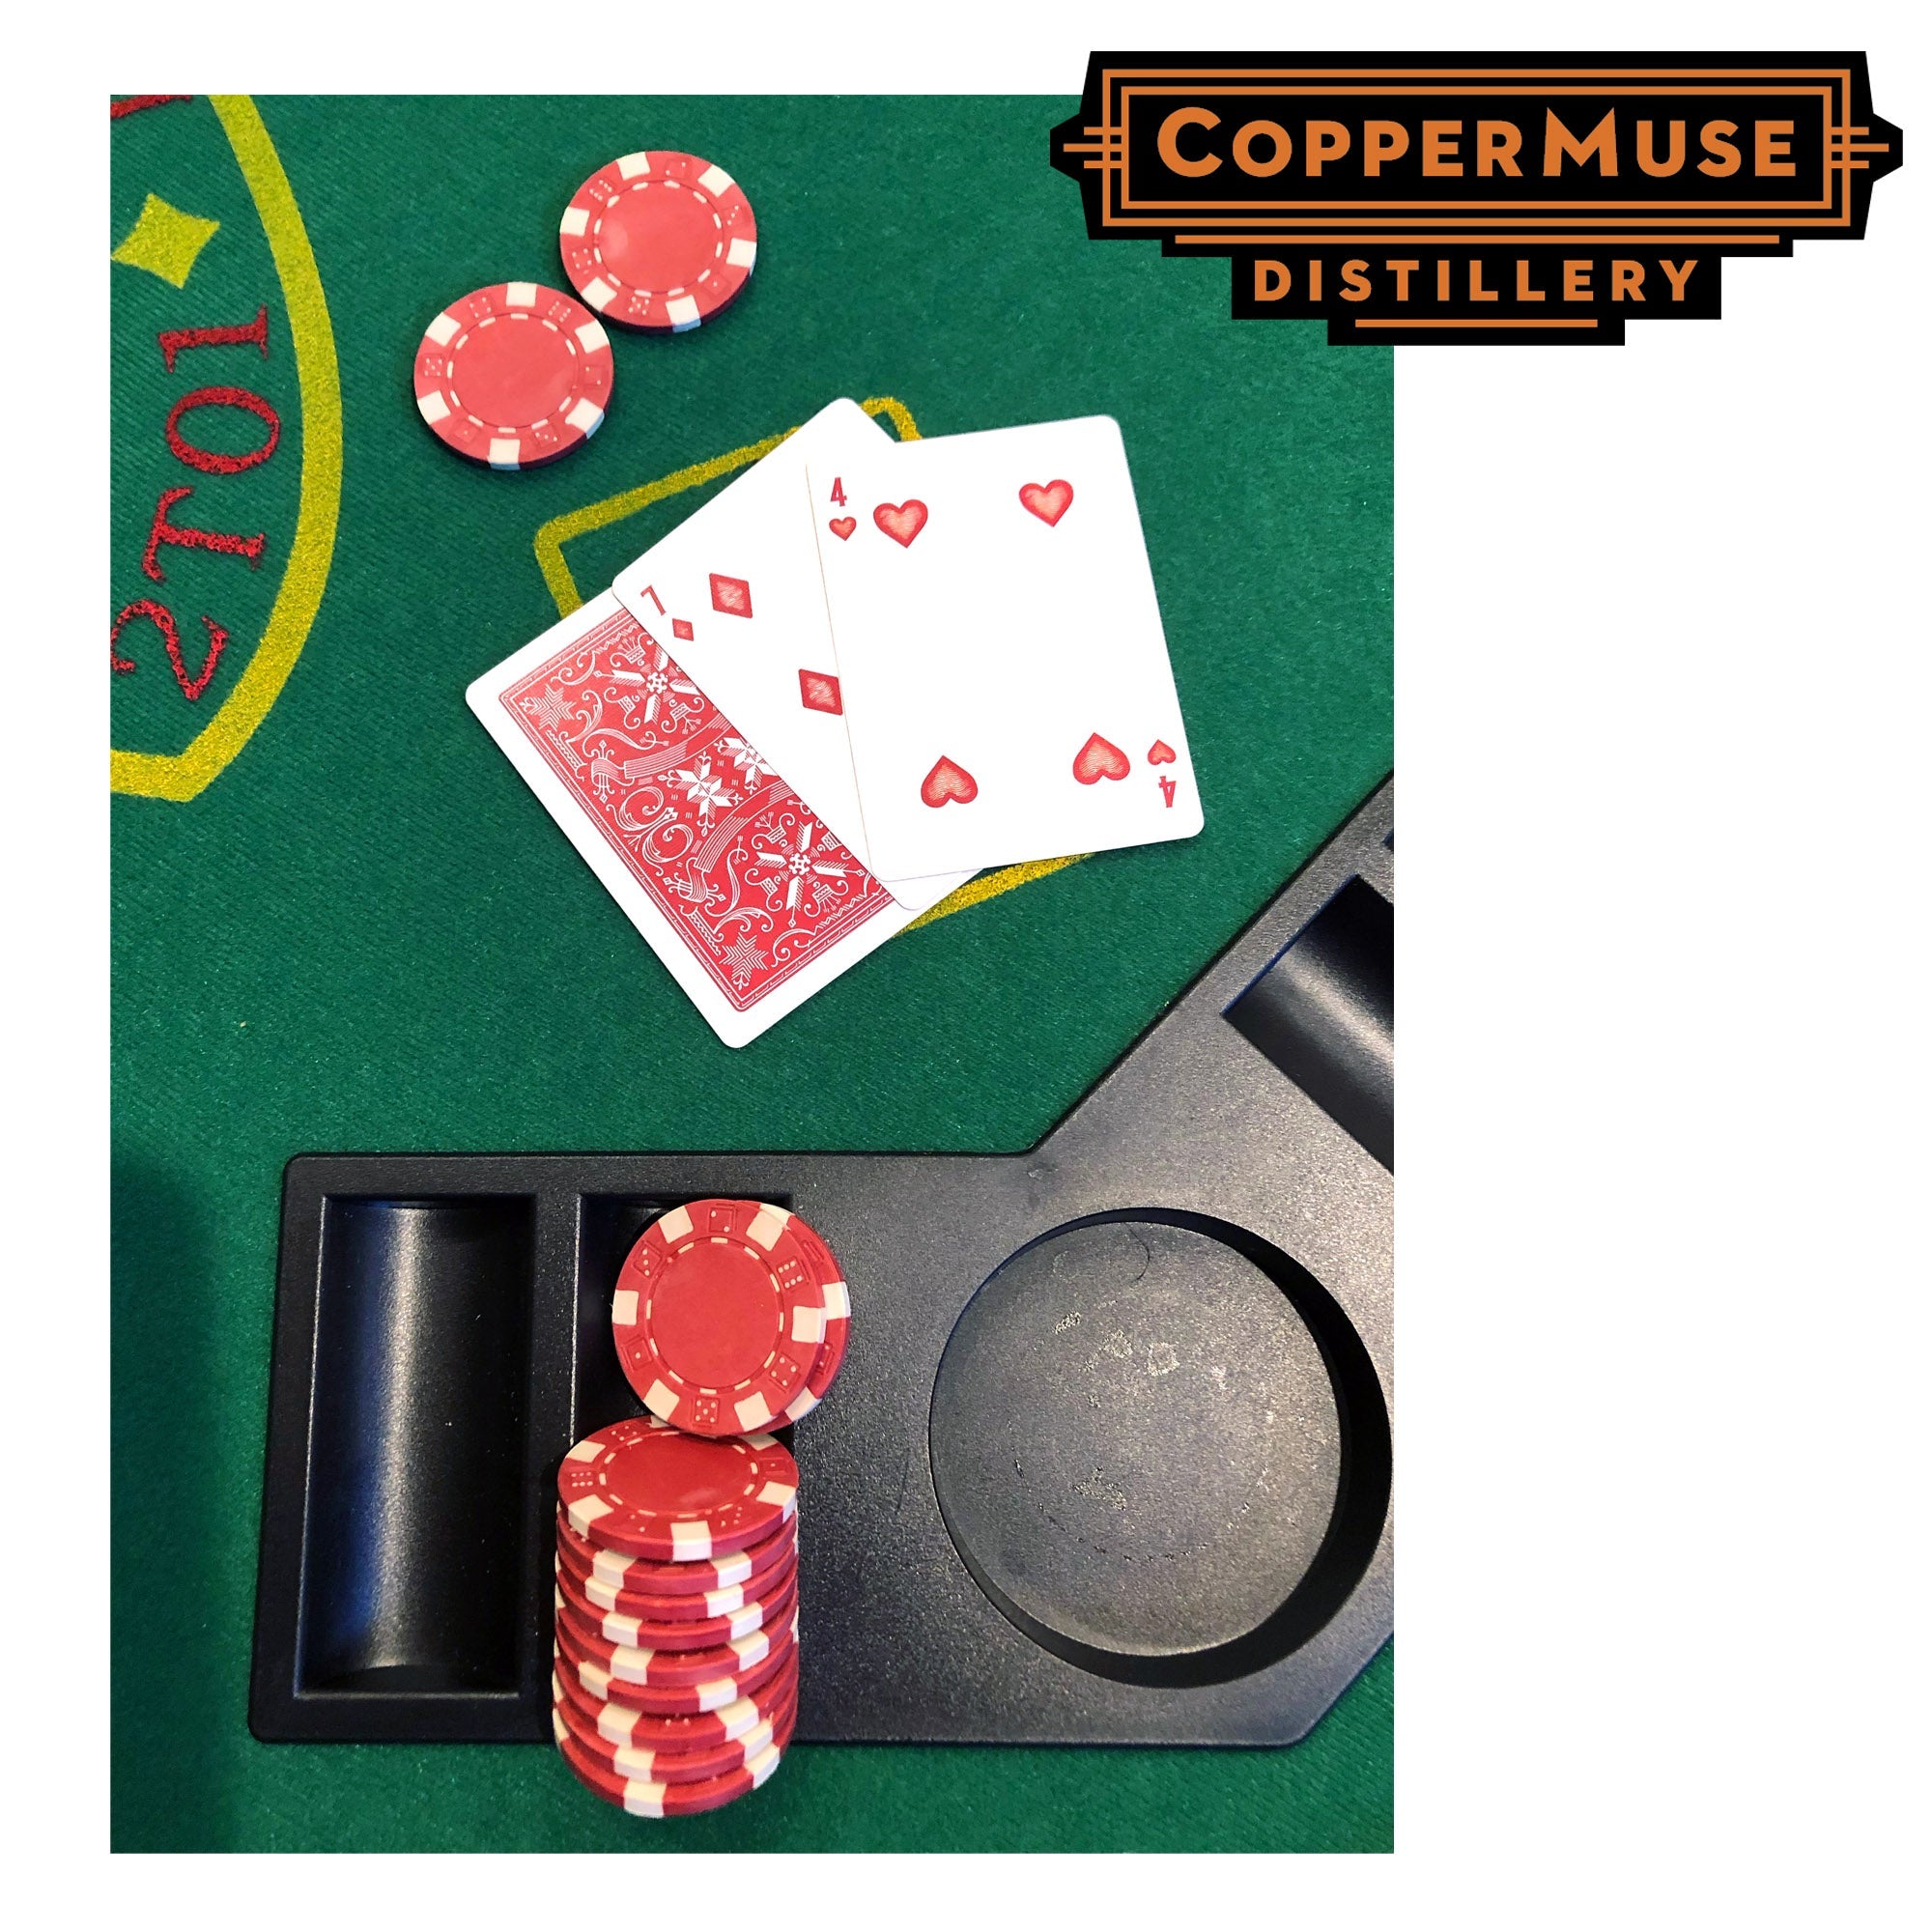 The Art of Poker at the Coppermuse Distillery-Thur 5.23.24 @ 6P